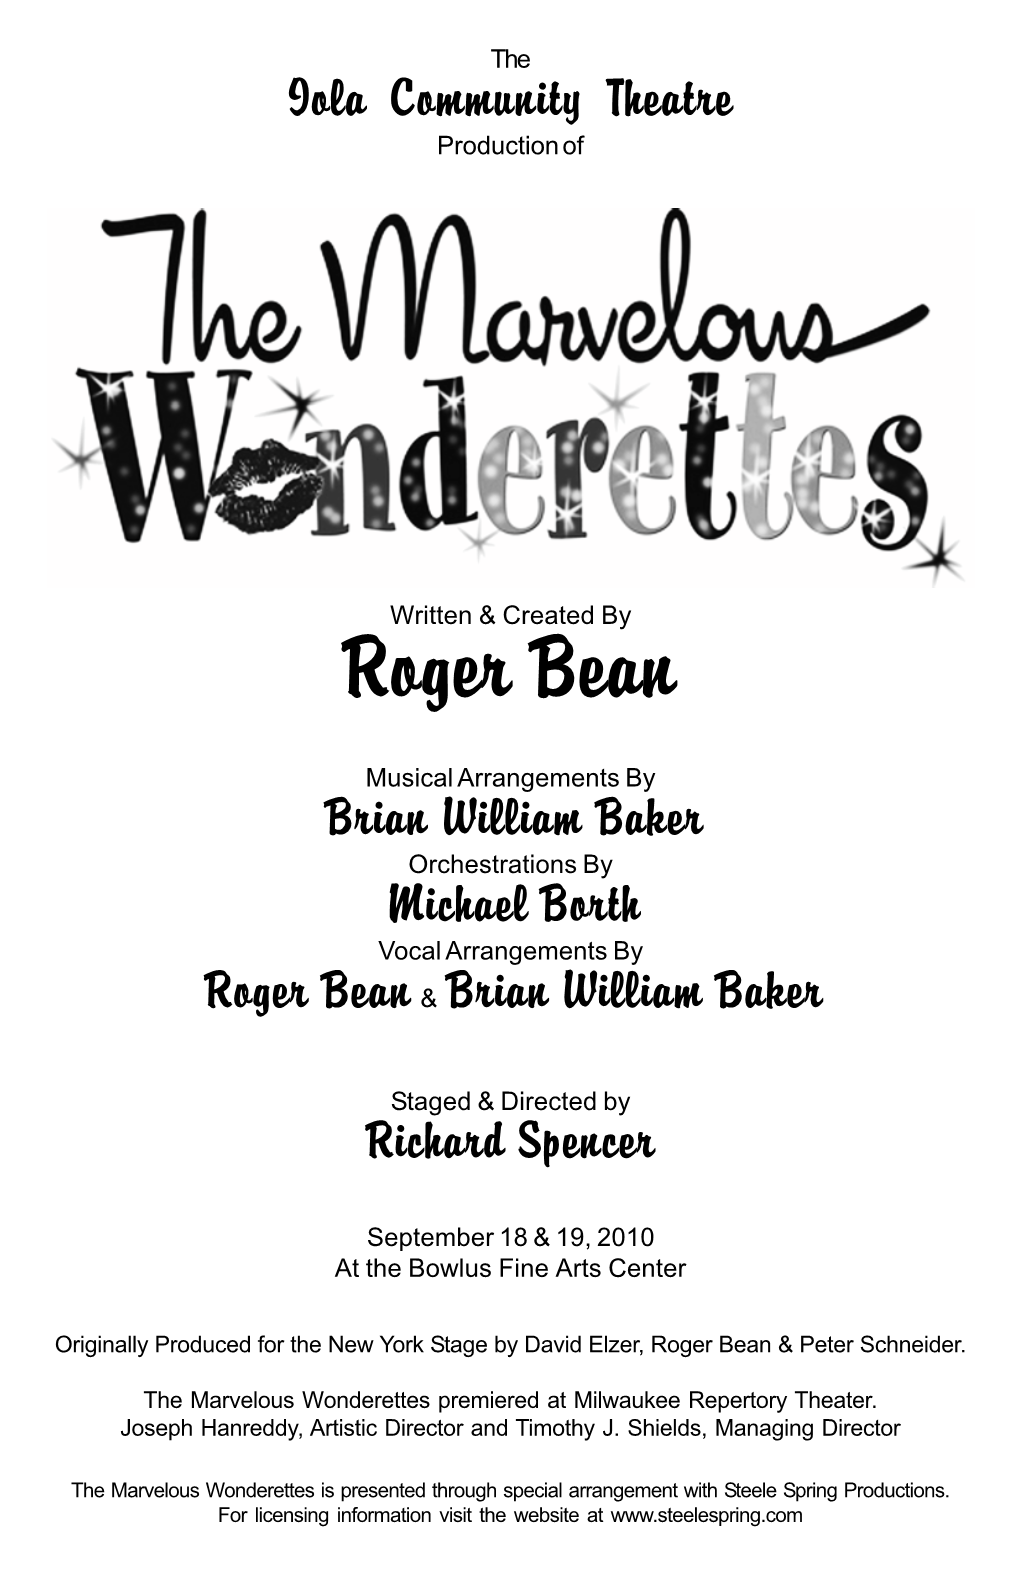 The Marvelous Wonderettes Premiered at Milwaukee Repertory Theater